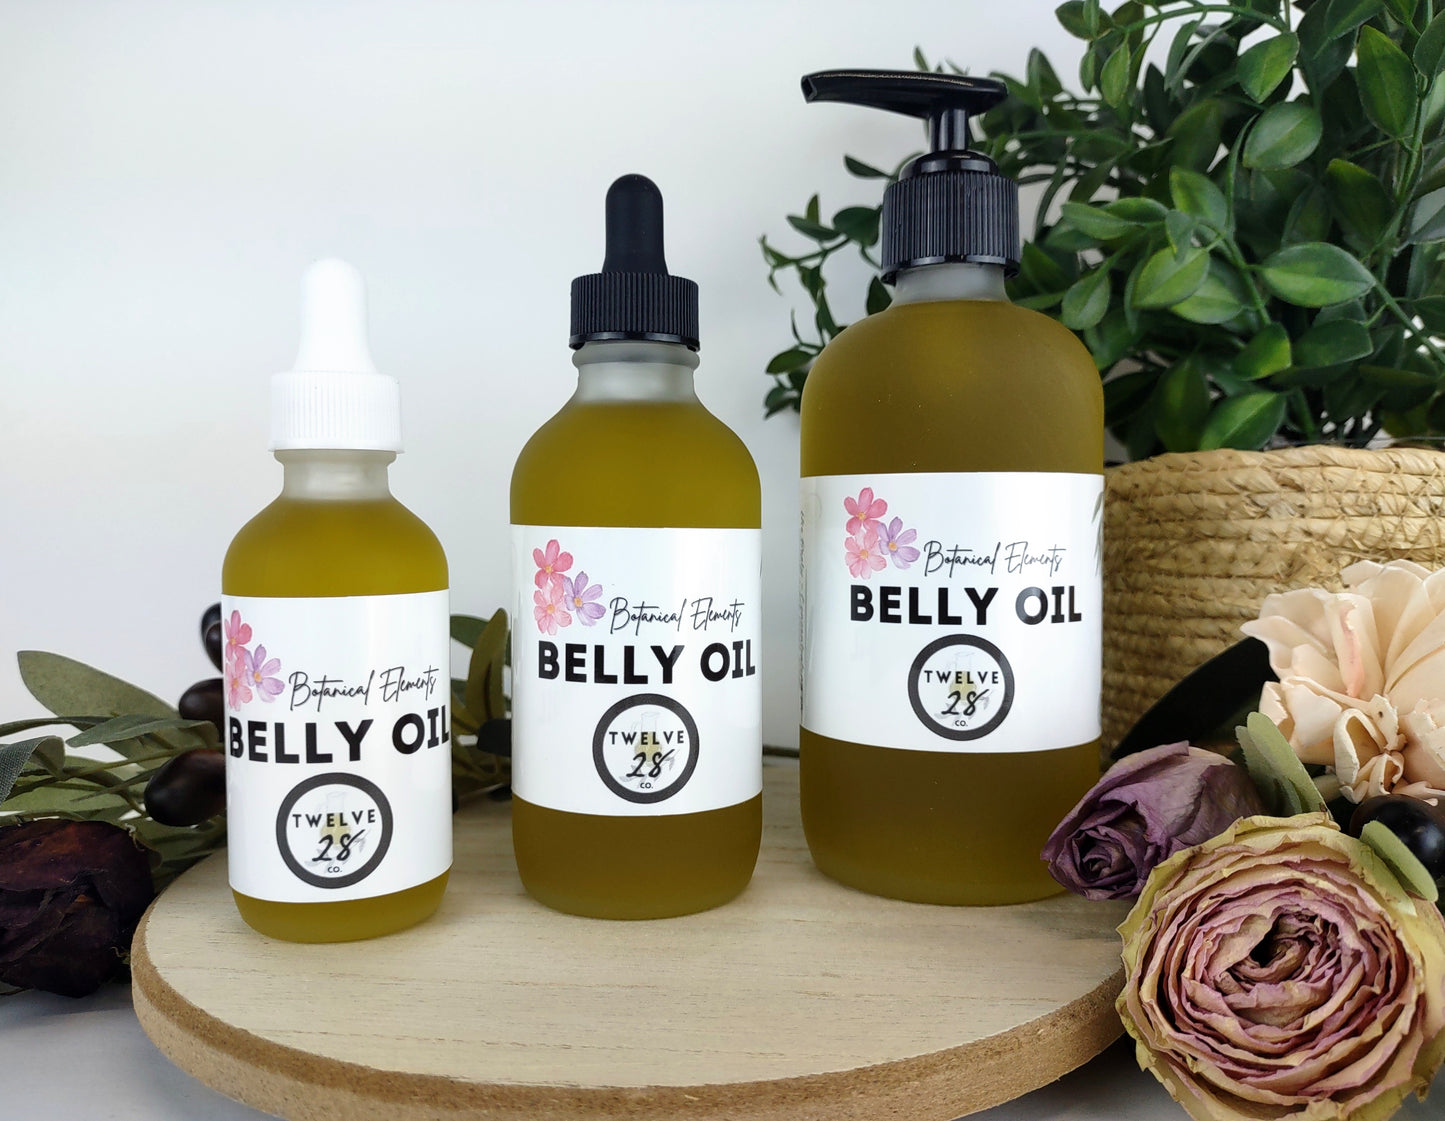 Organic Belly Oil, Pregnancy Mom to be gift, Helps Prevent Stretch Marks, Vegan, Gift for Pregnant Mom to be, Belly Butter Cream Alternative